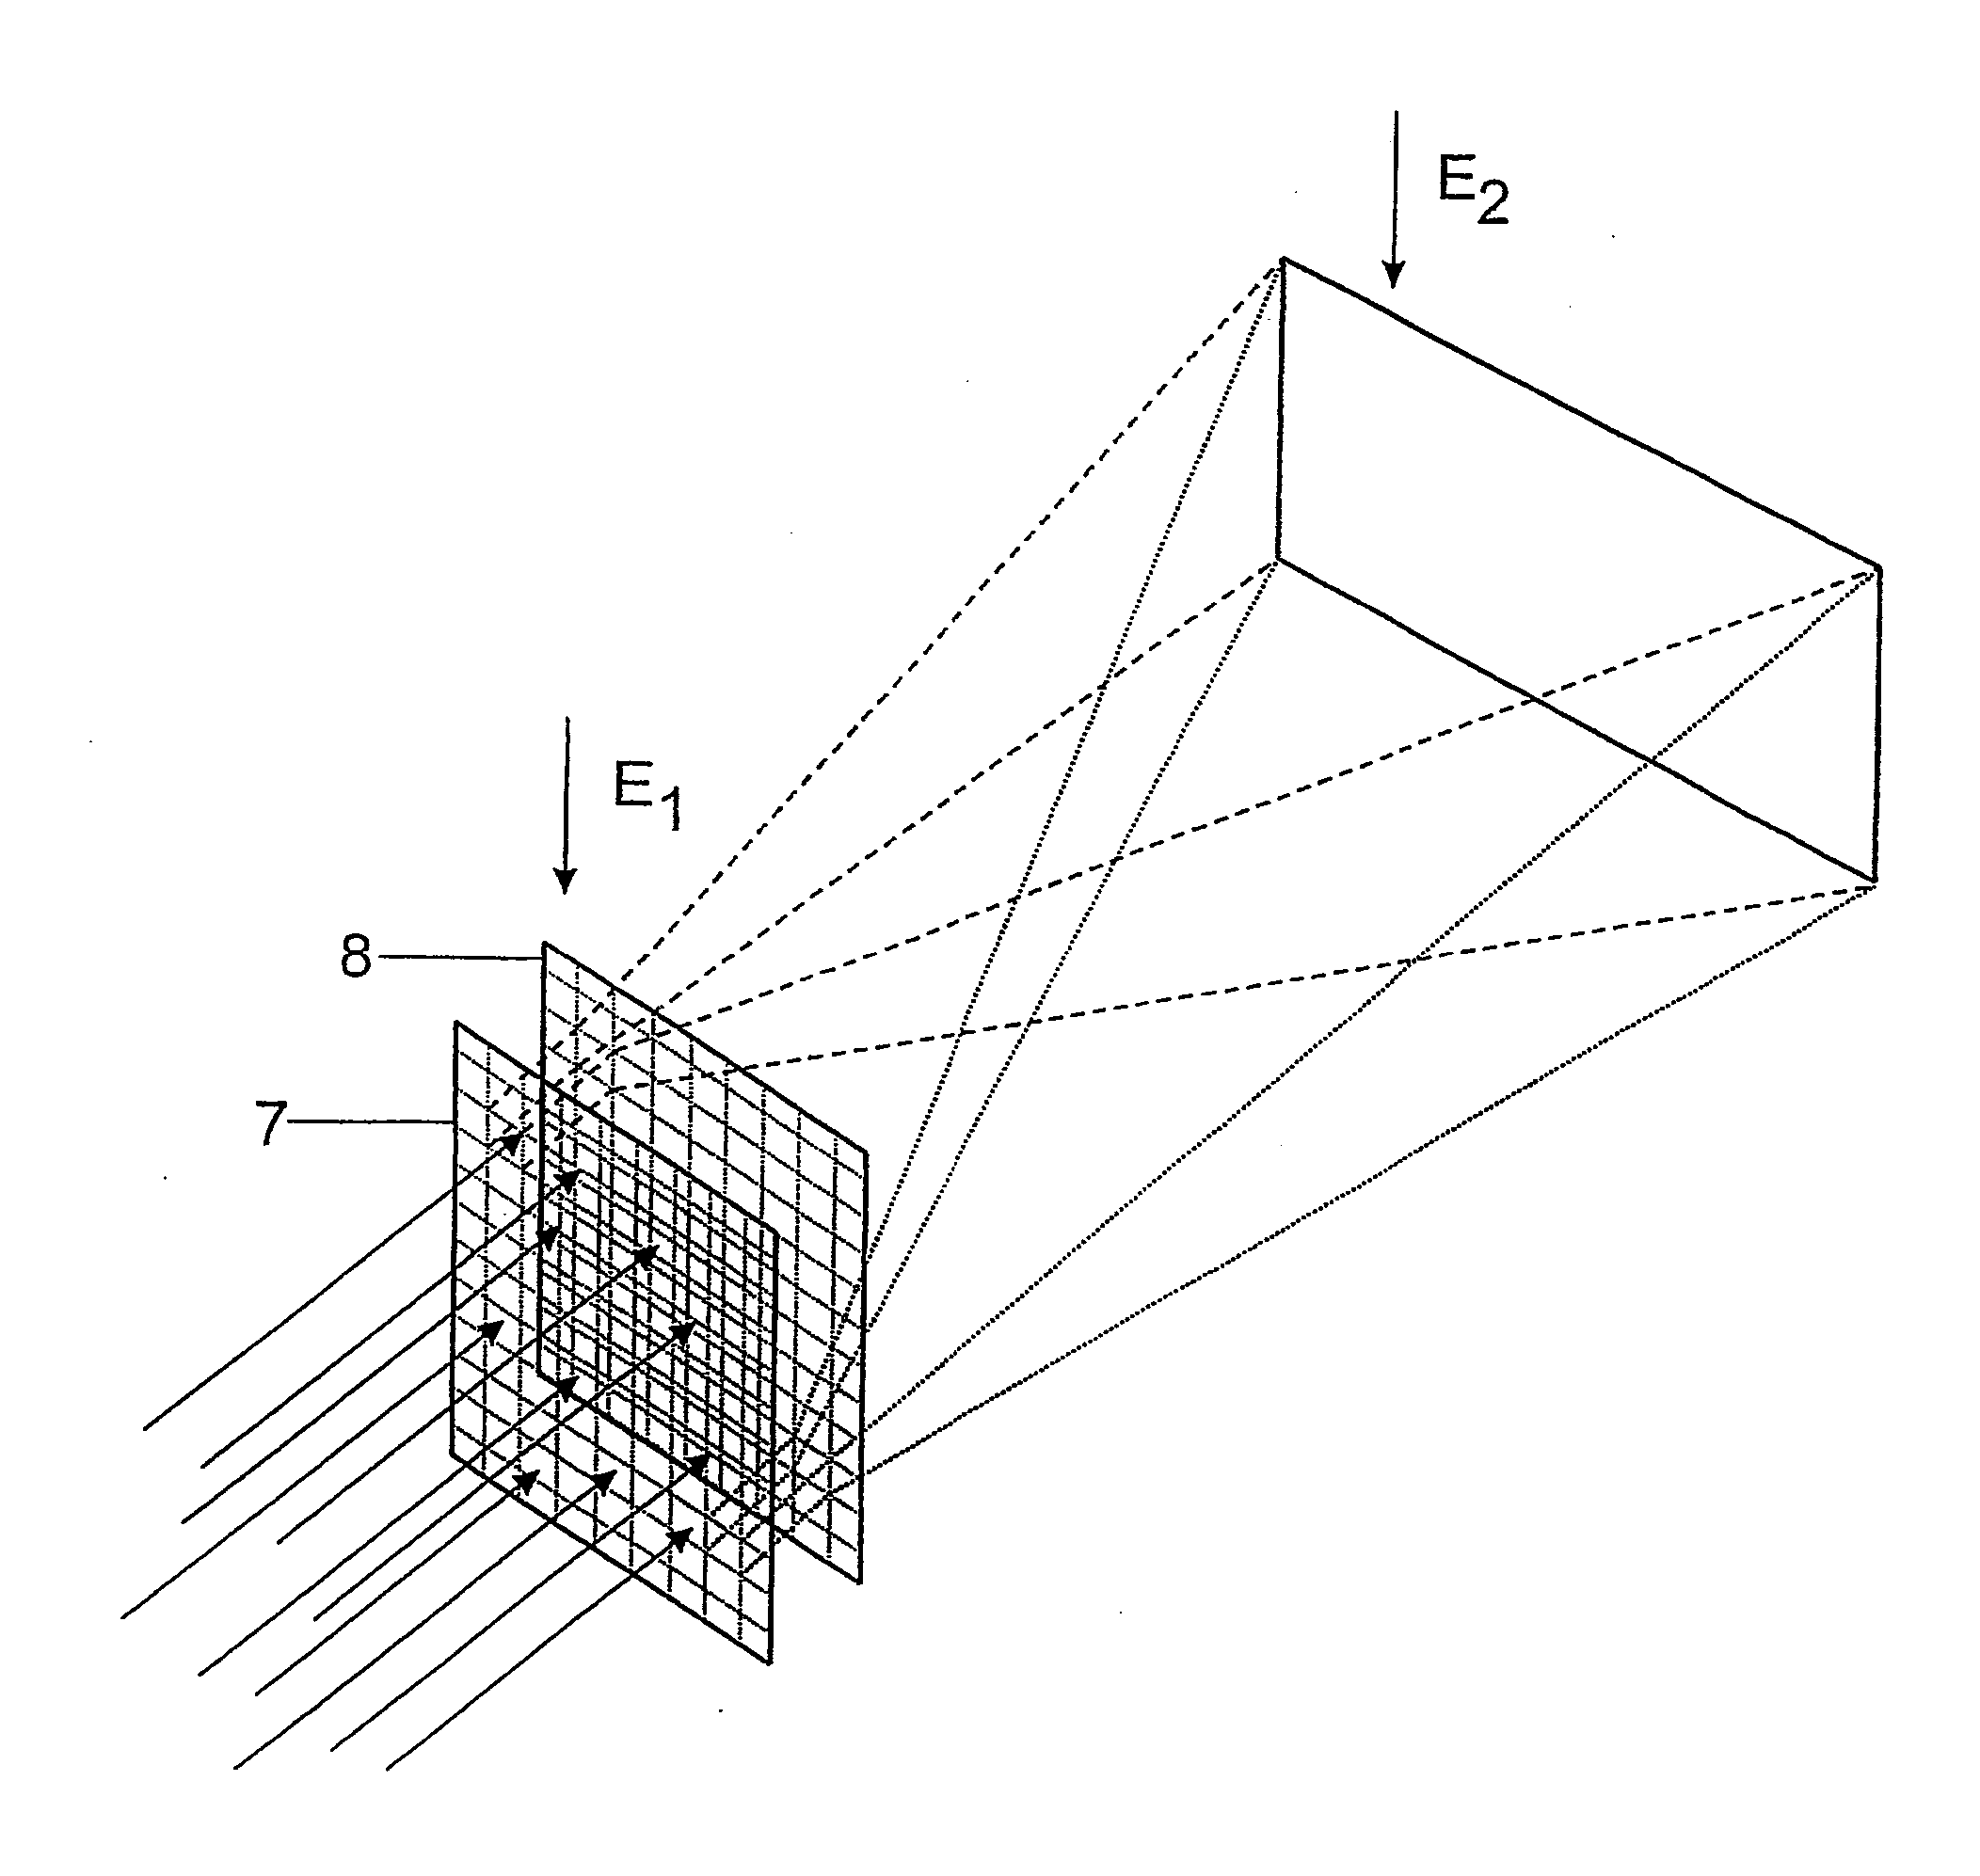 Optical System For Converting A Primary Intensity Distribution Into A Predefined Intensity Distribution That Is Dependent On A Solid Angle